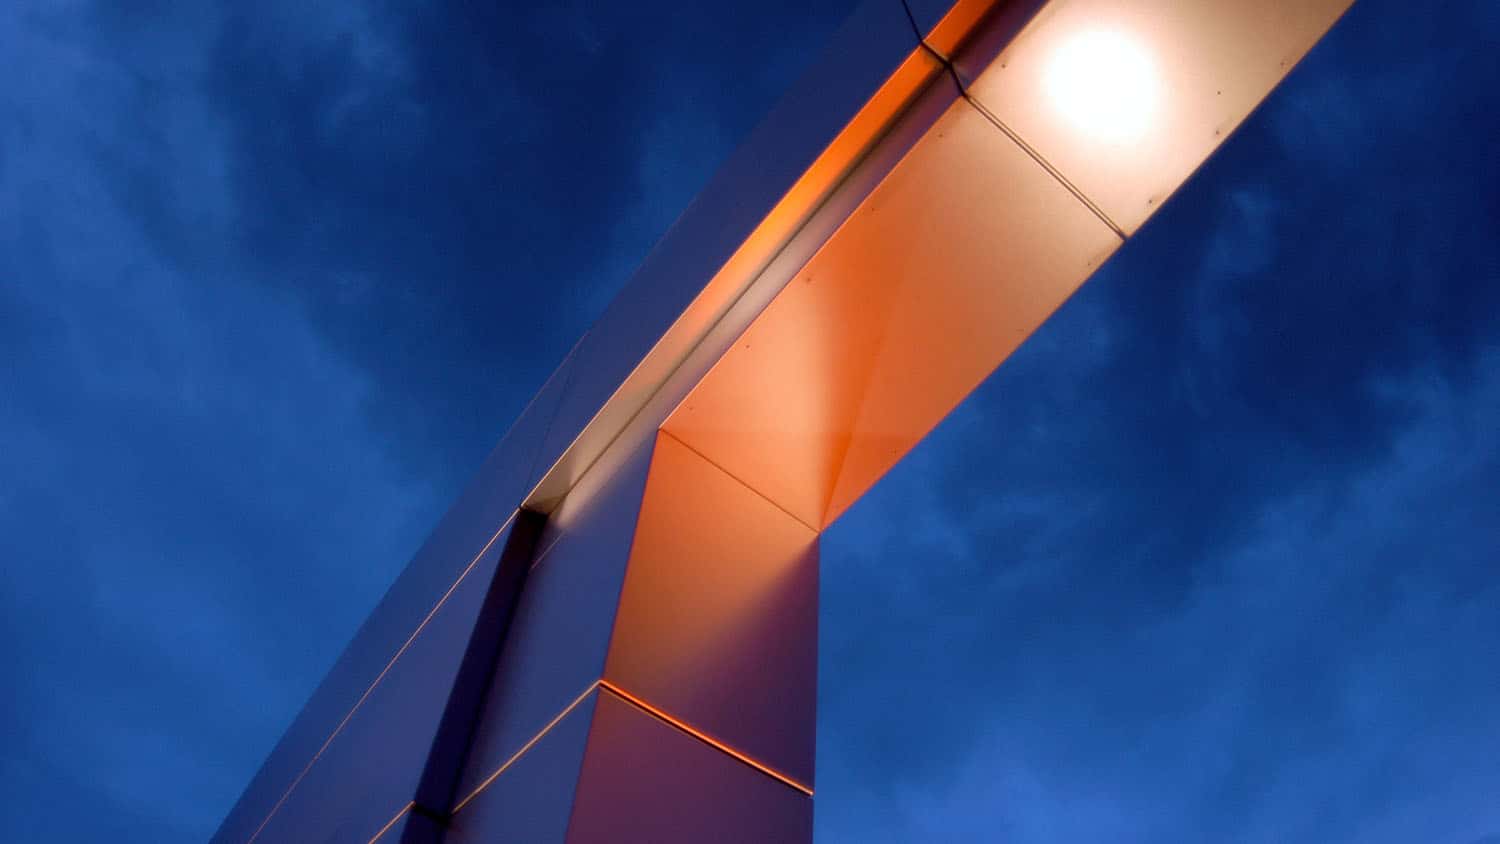 angular metal arch silhouetted against a cloudy sky